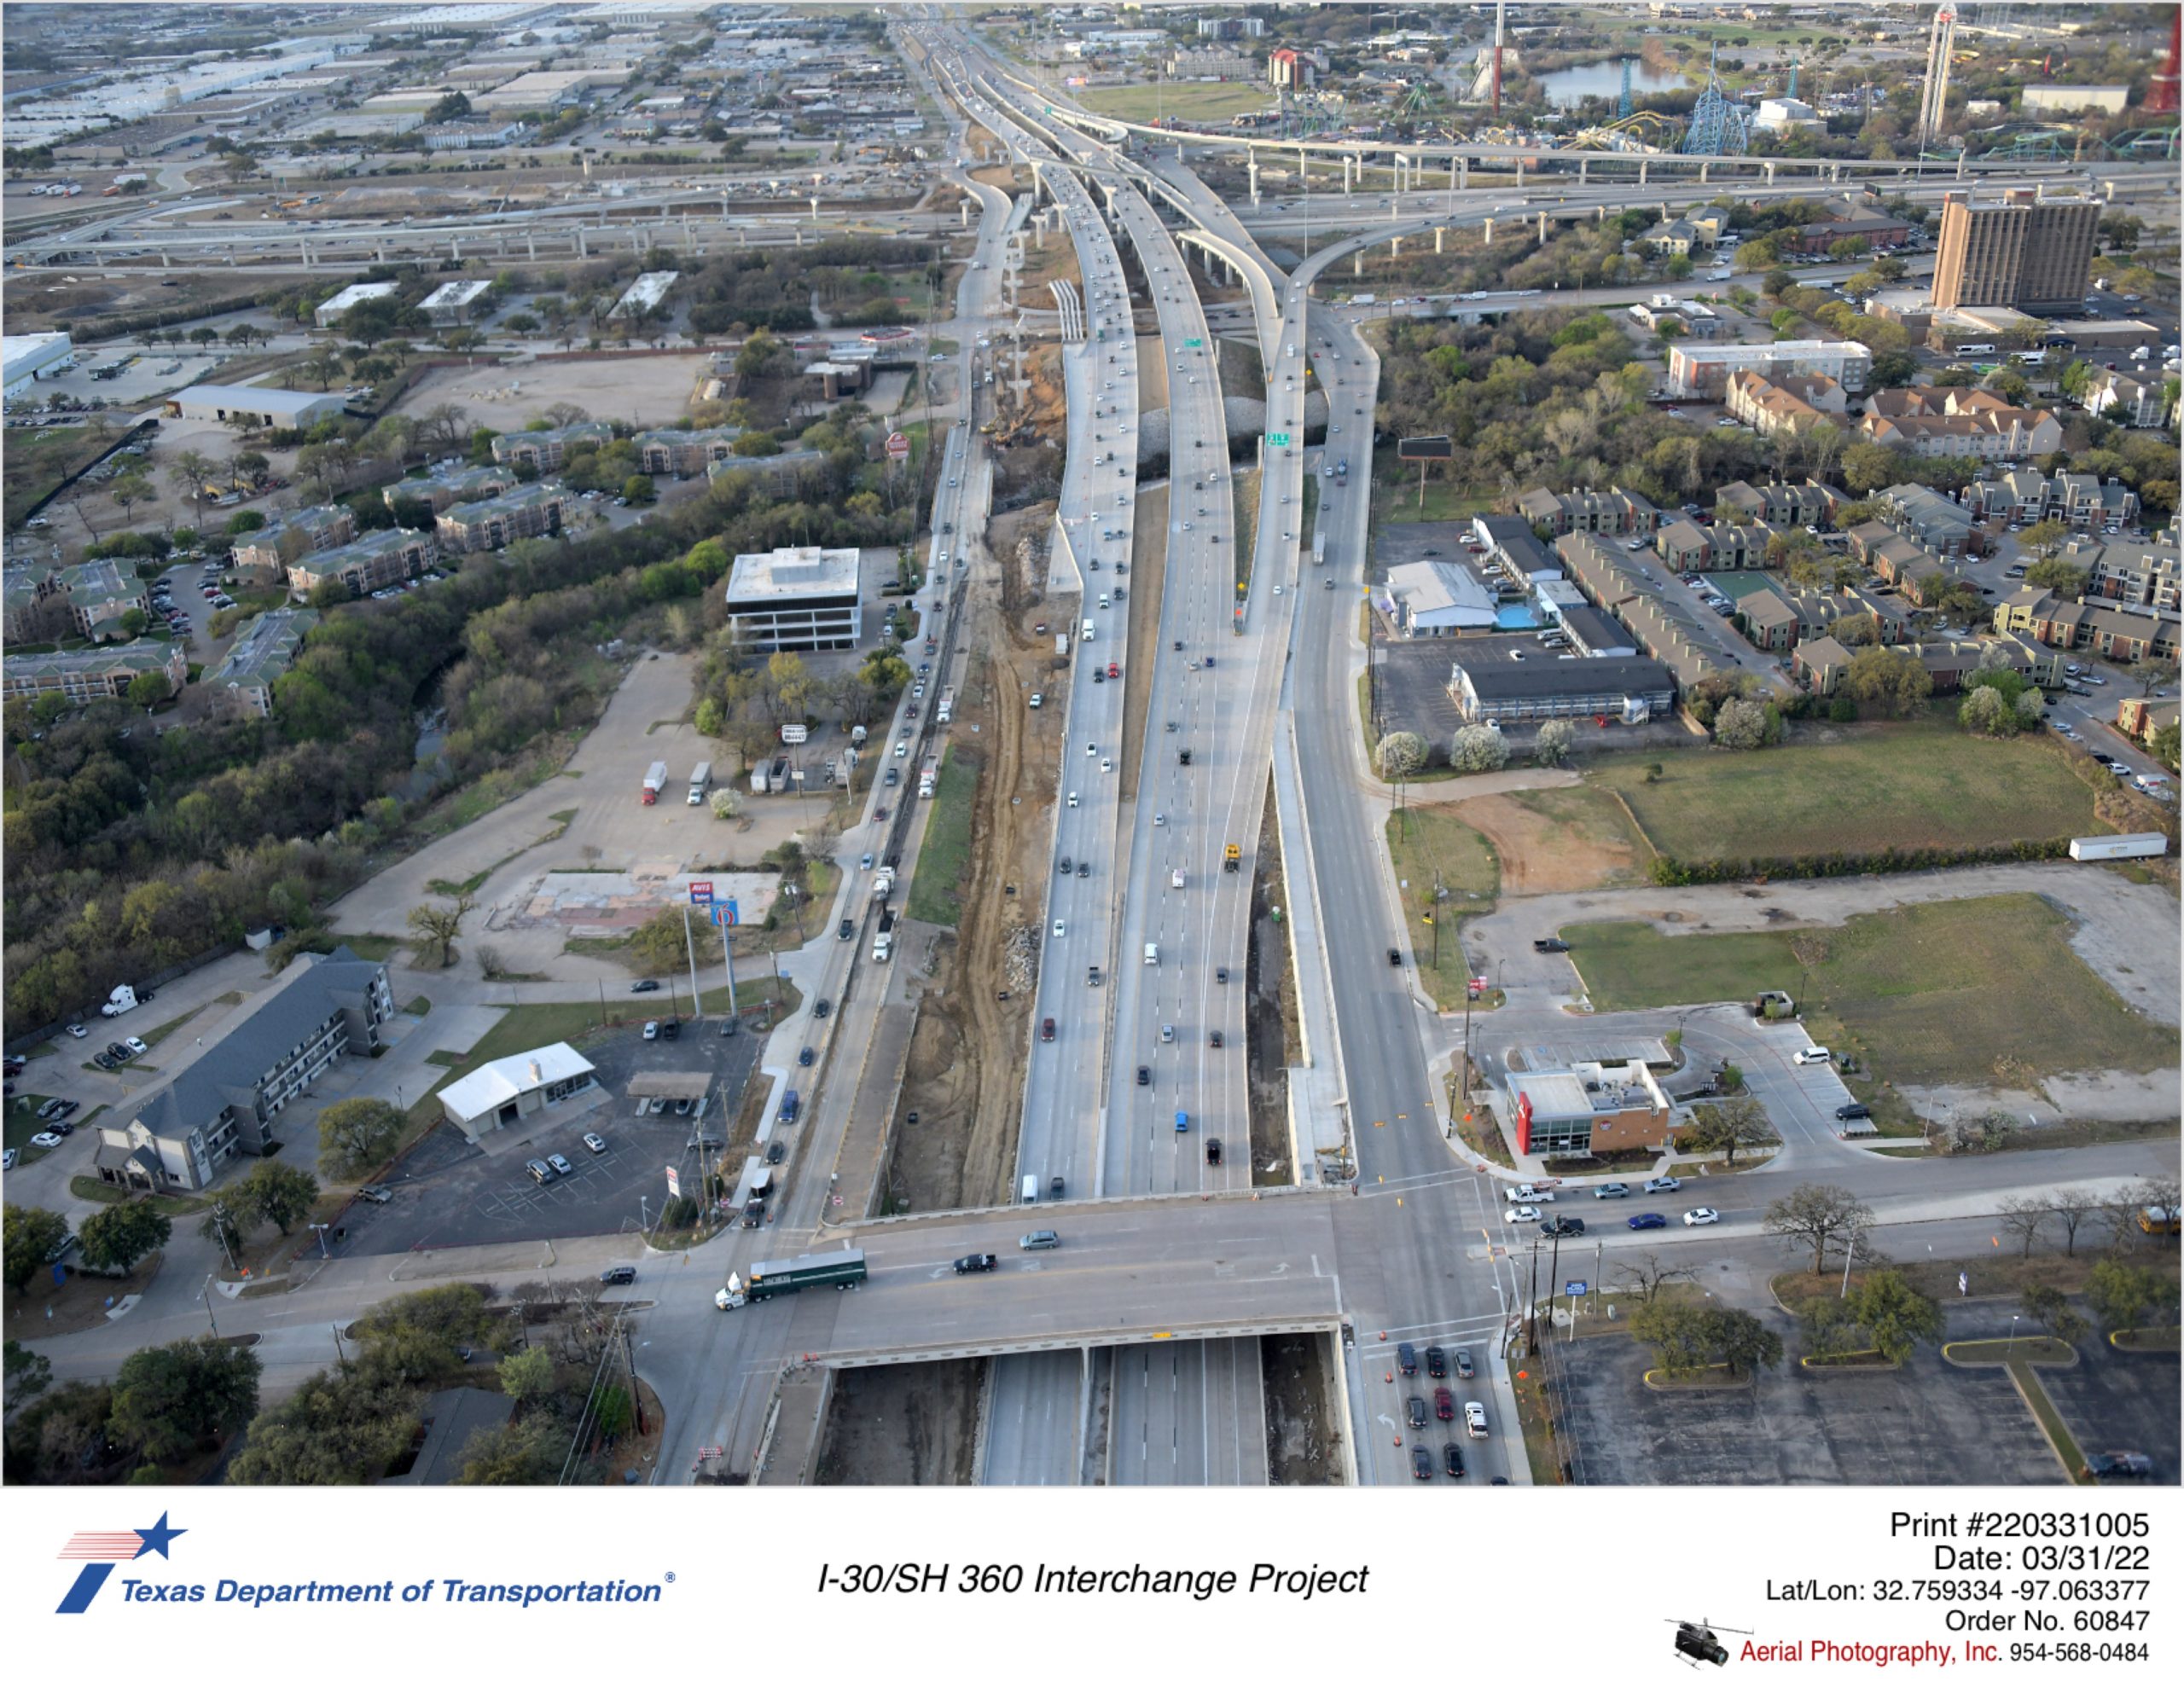 SH 360 looking south over Ave J in foreground. Construction focus between northbound frontage road and northbound mainlanes.